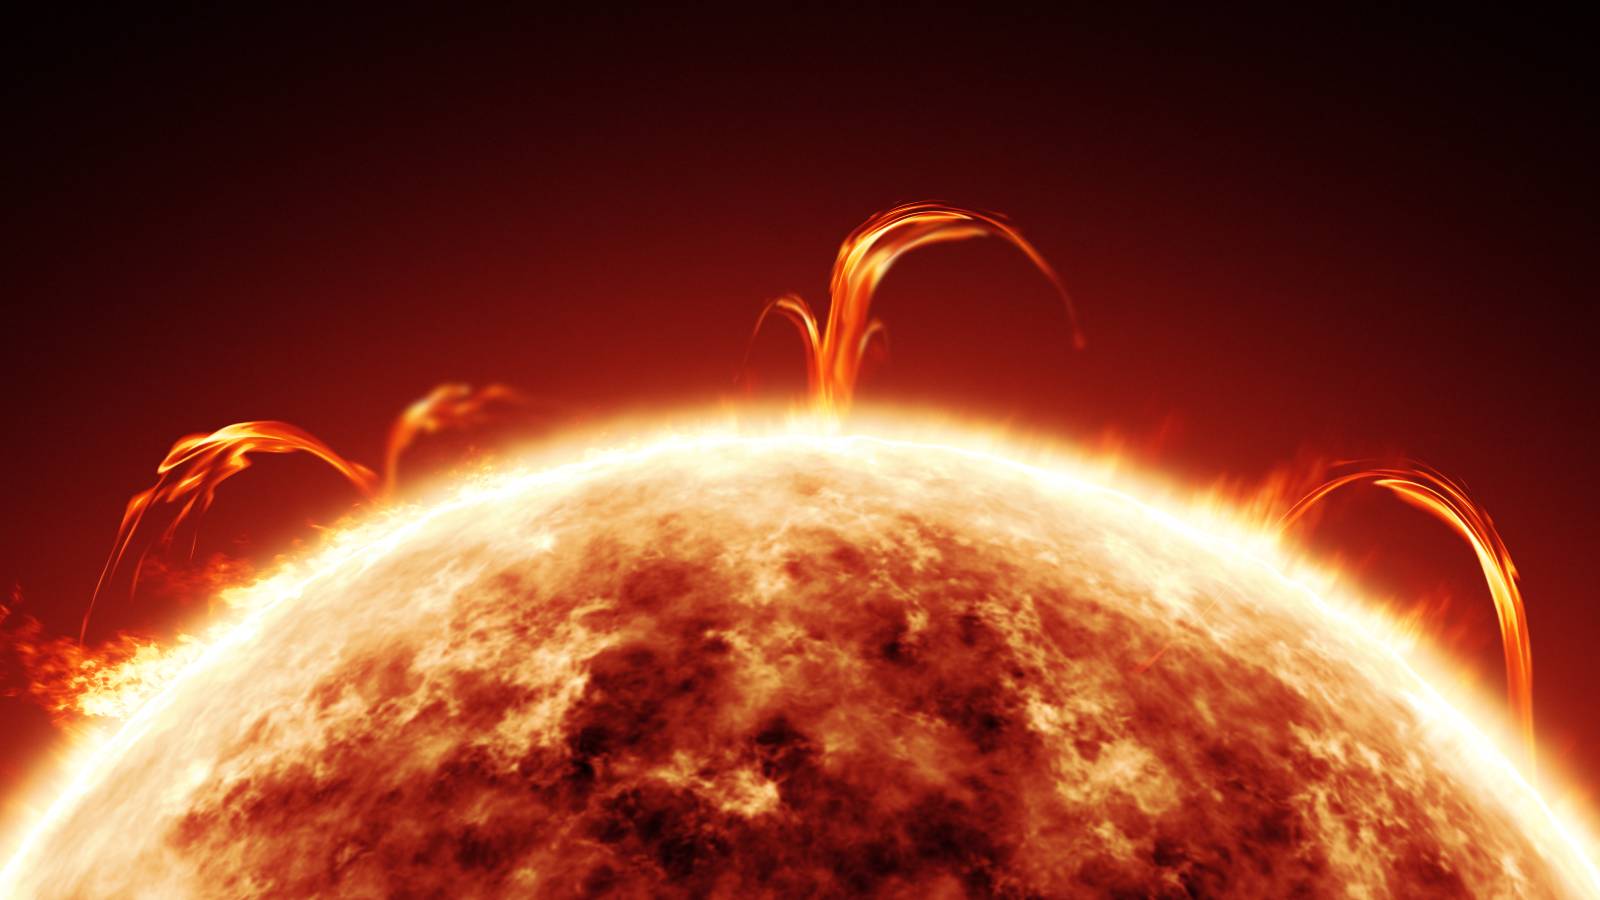 Close-up of sun's surface with solar flares.